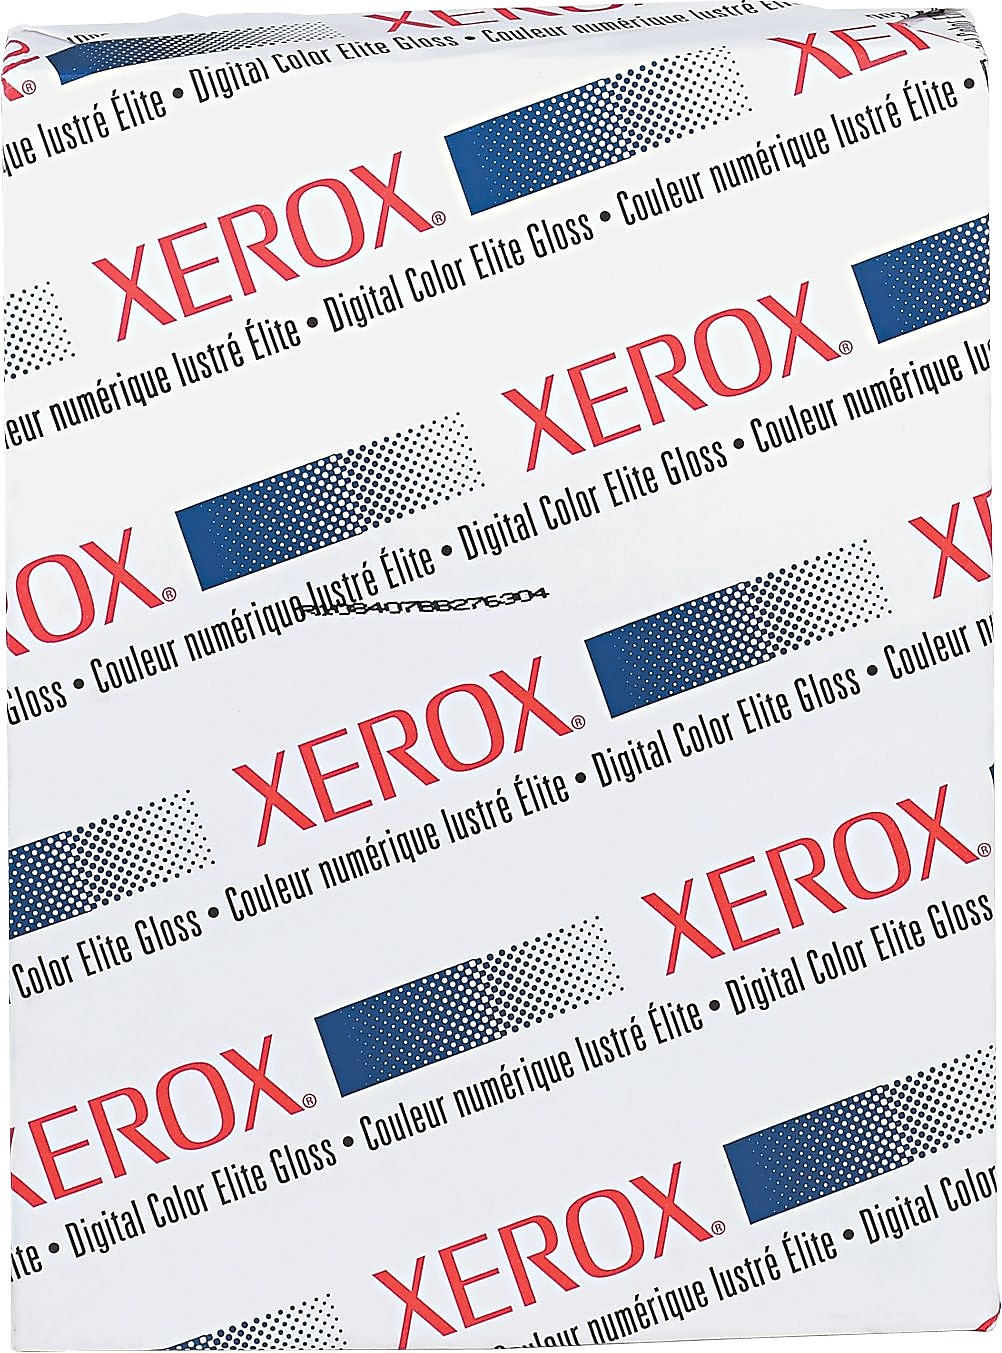 Xerox Bold Coated Gloss Digital Printing Cover Paper 8 1/2 x 11 White 250 Sheets/PK 3R11458 - image 2 of 3